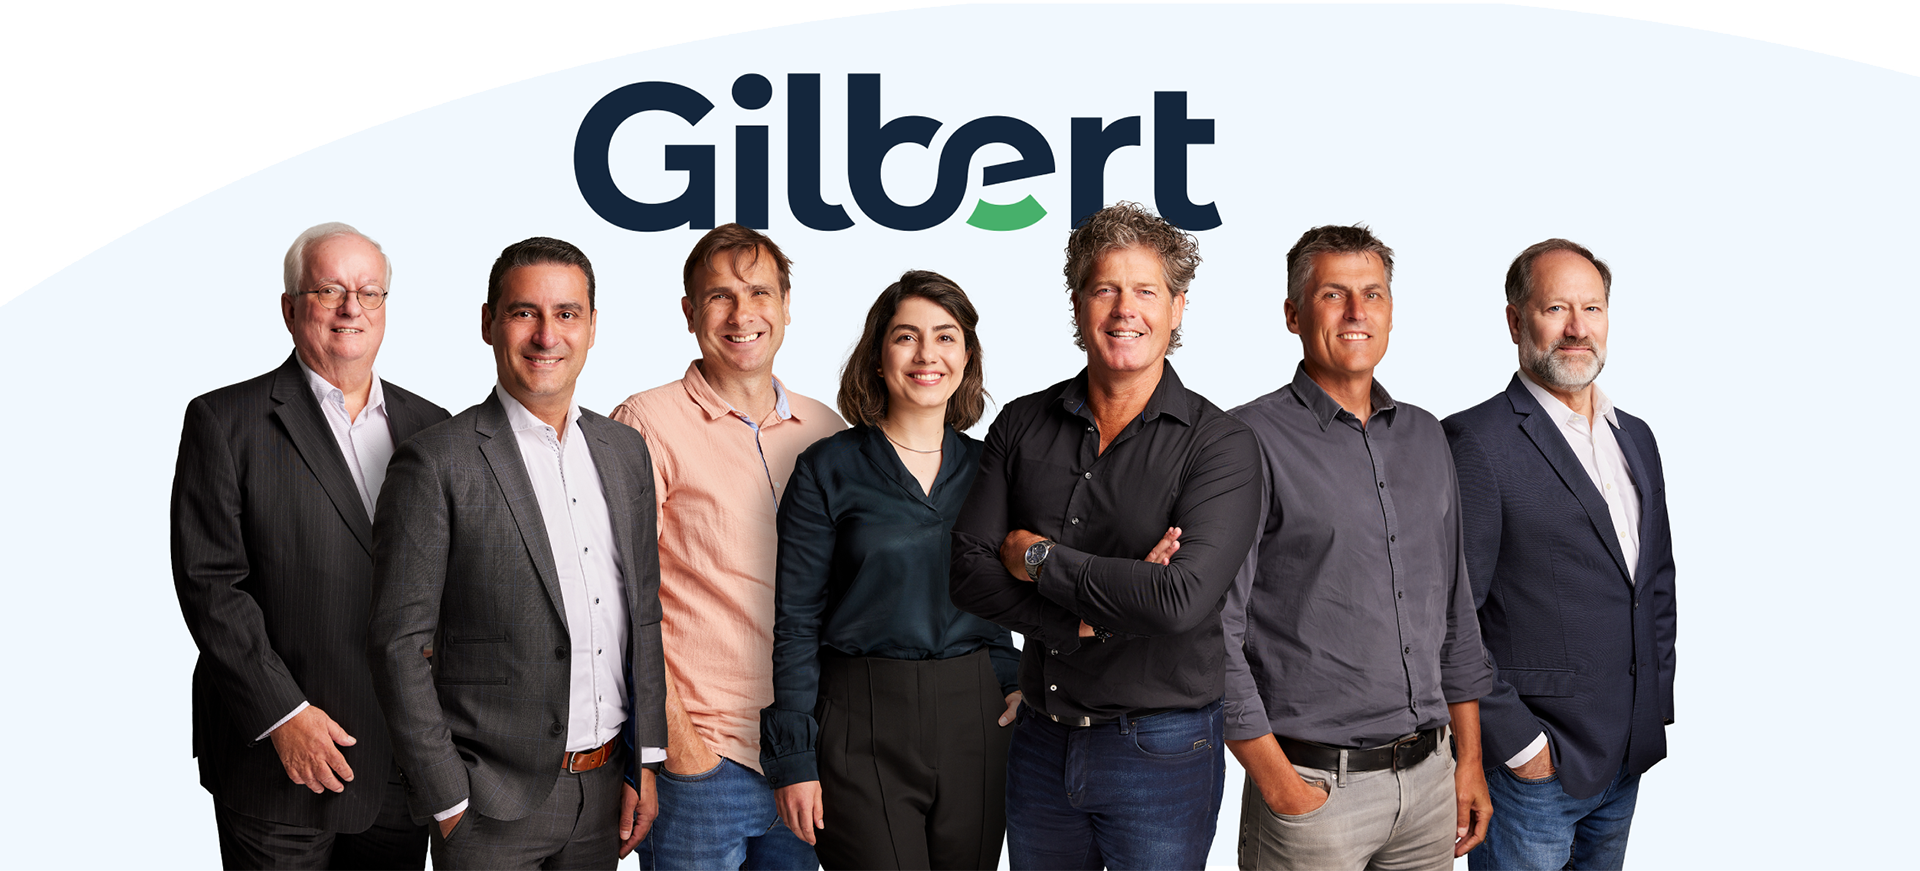 Gilbert is hiring a system architect